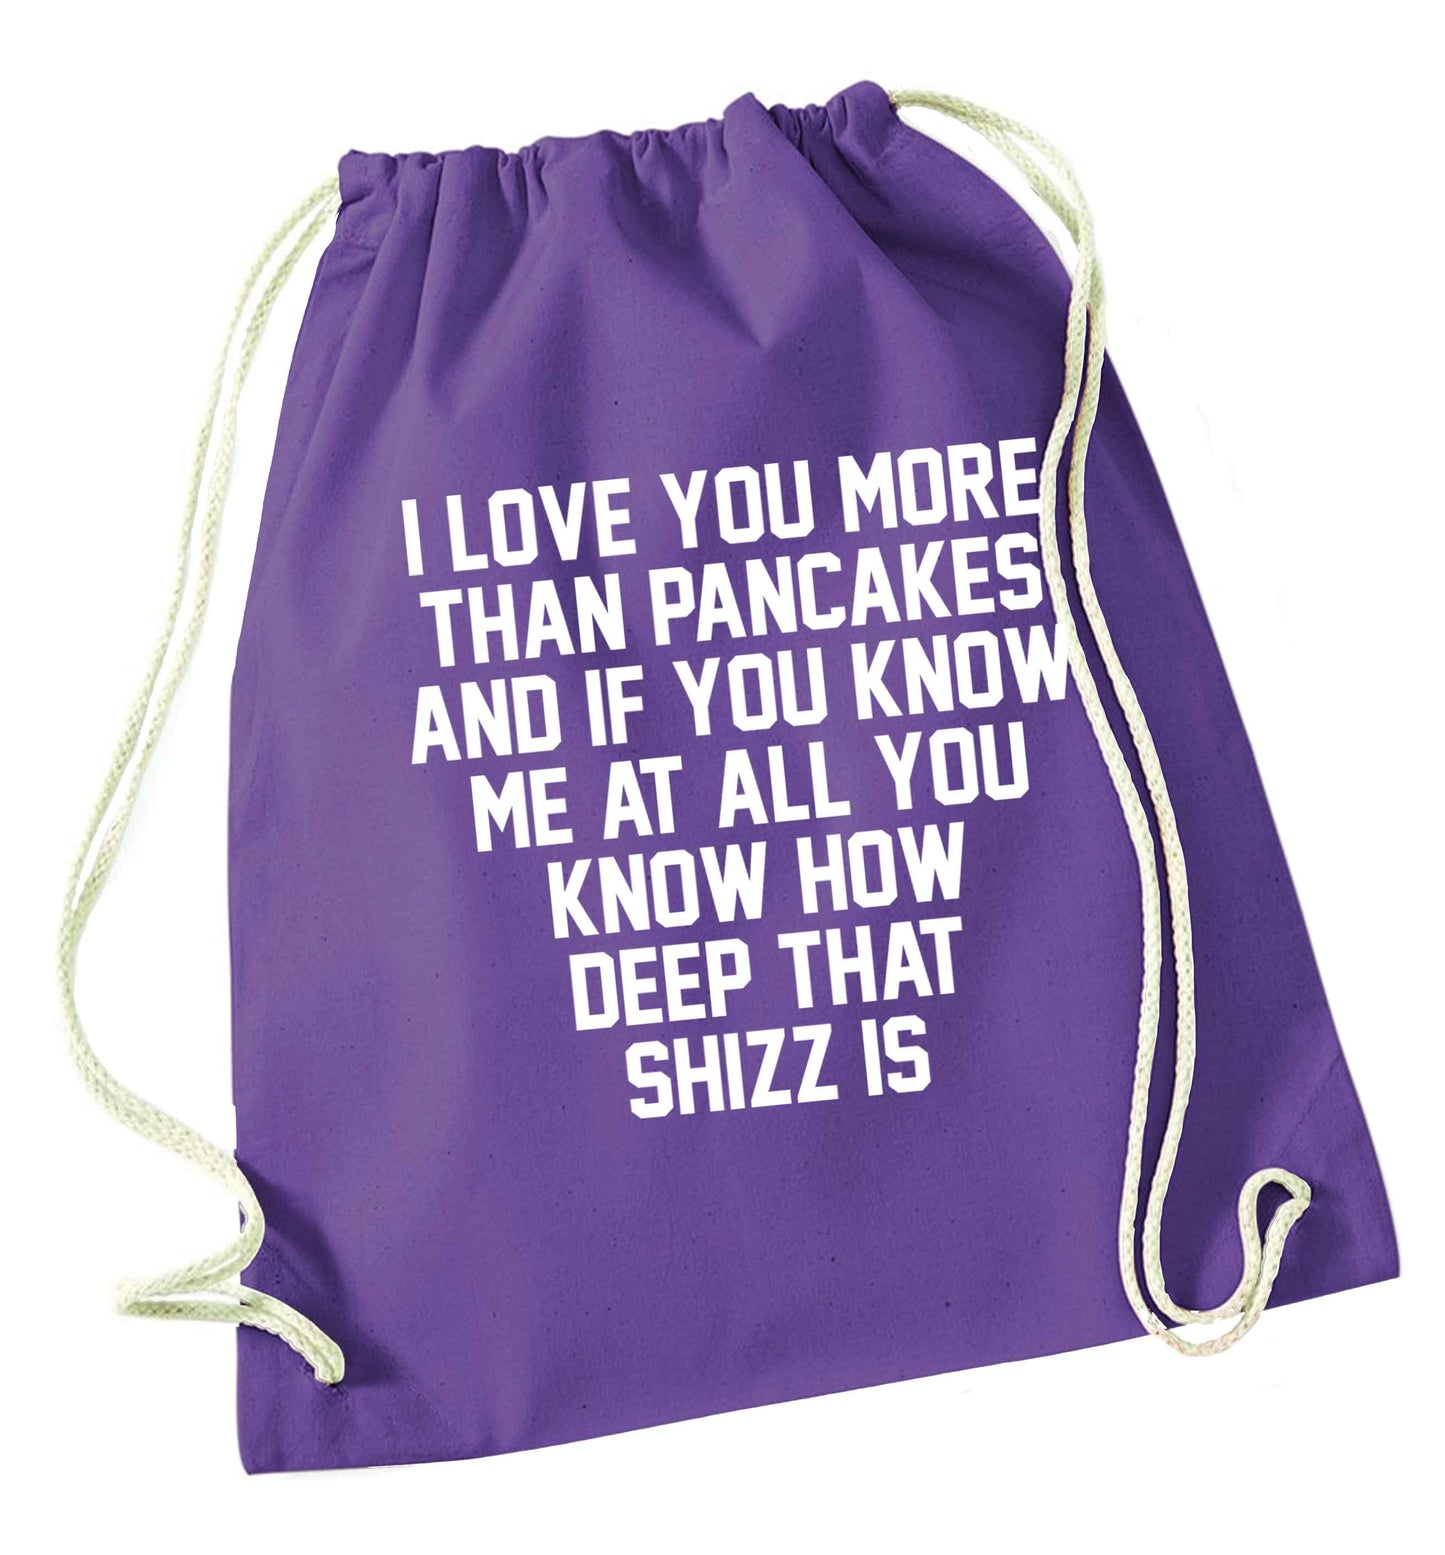 I love you more than pancakes and if you know me at all you know how deep that shizz is purple drawstring bag